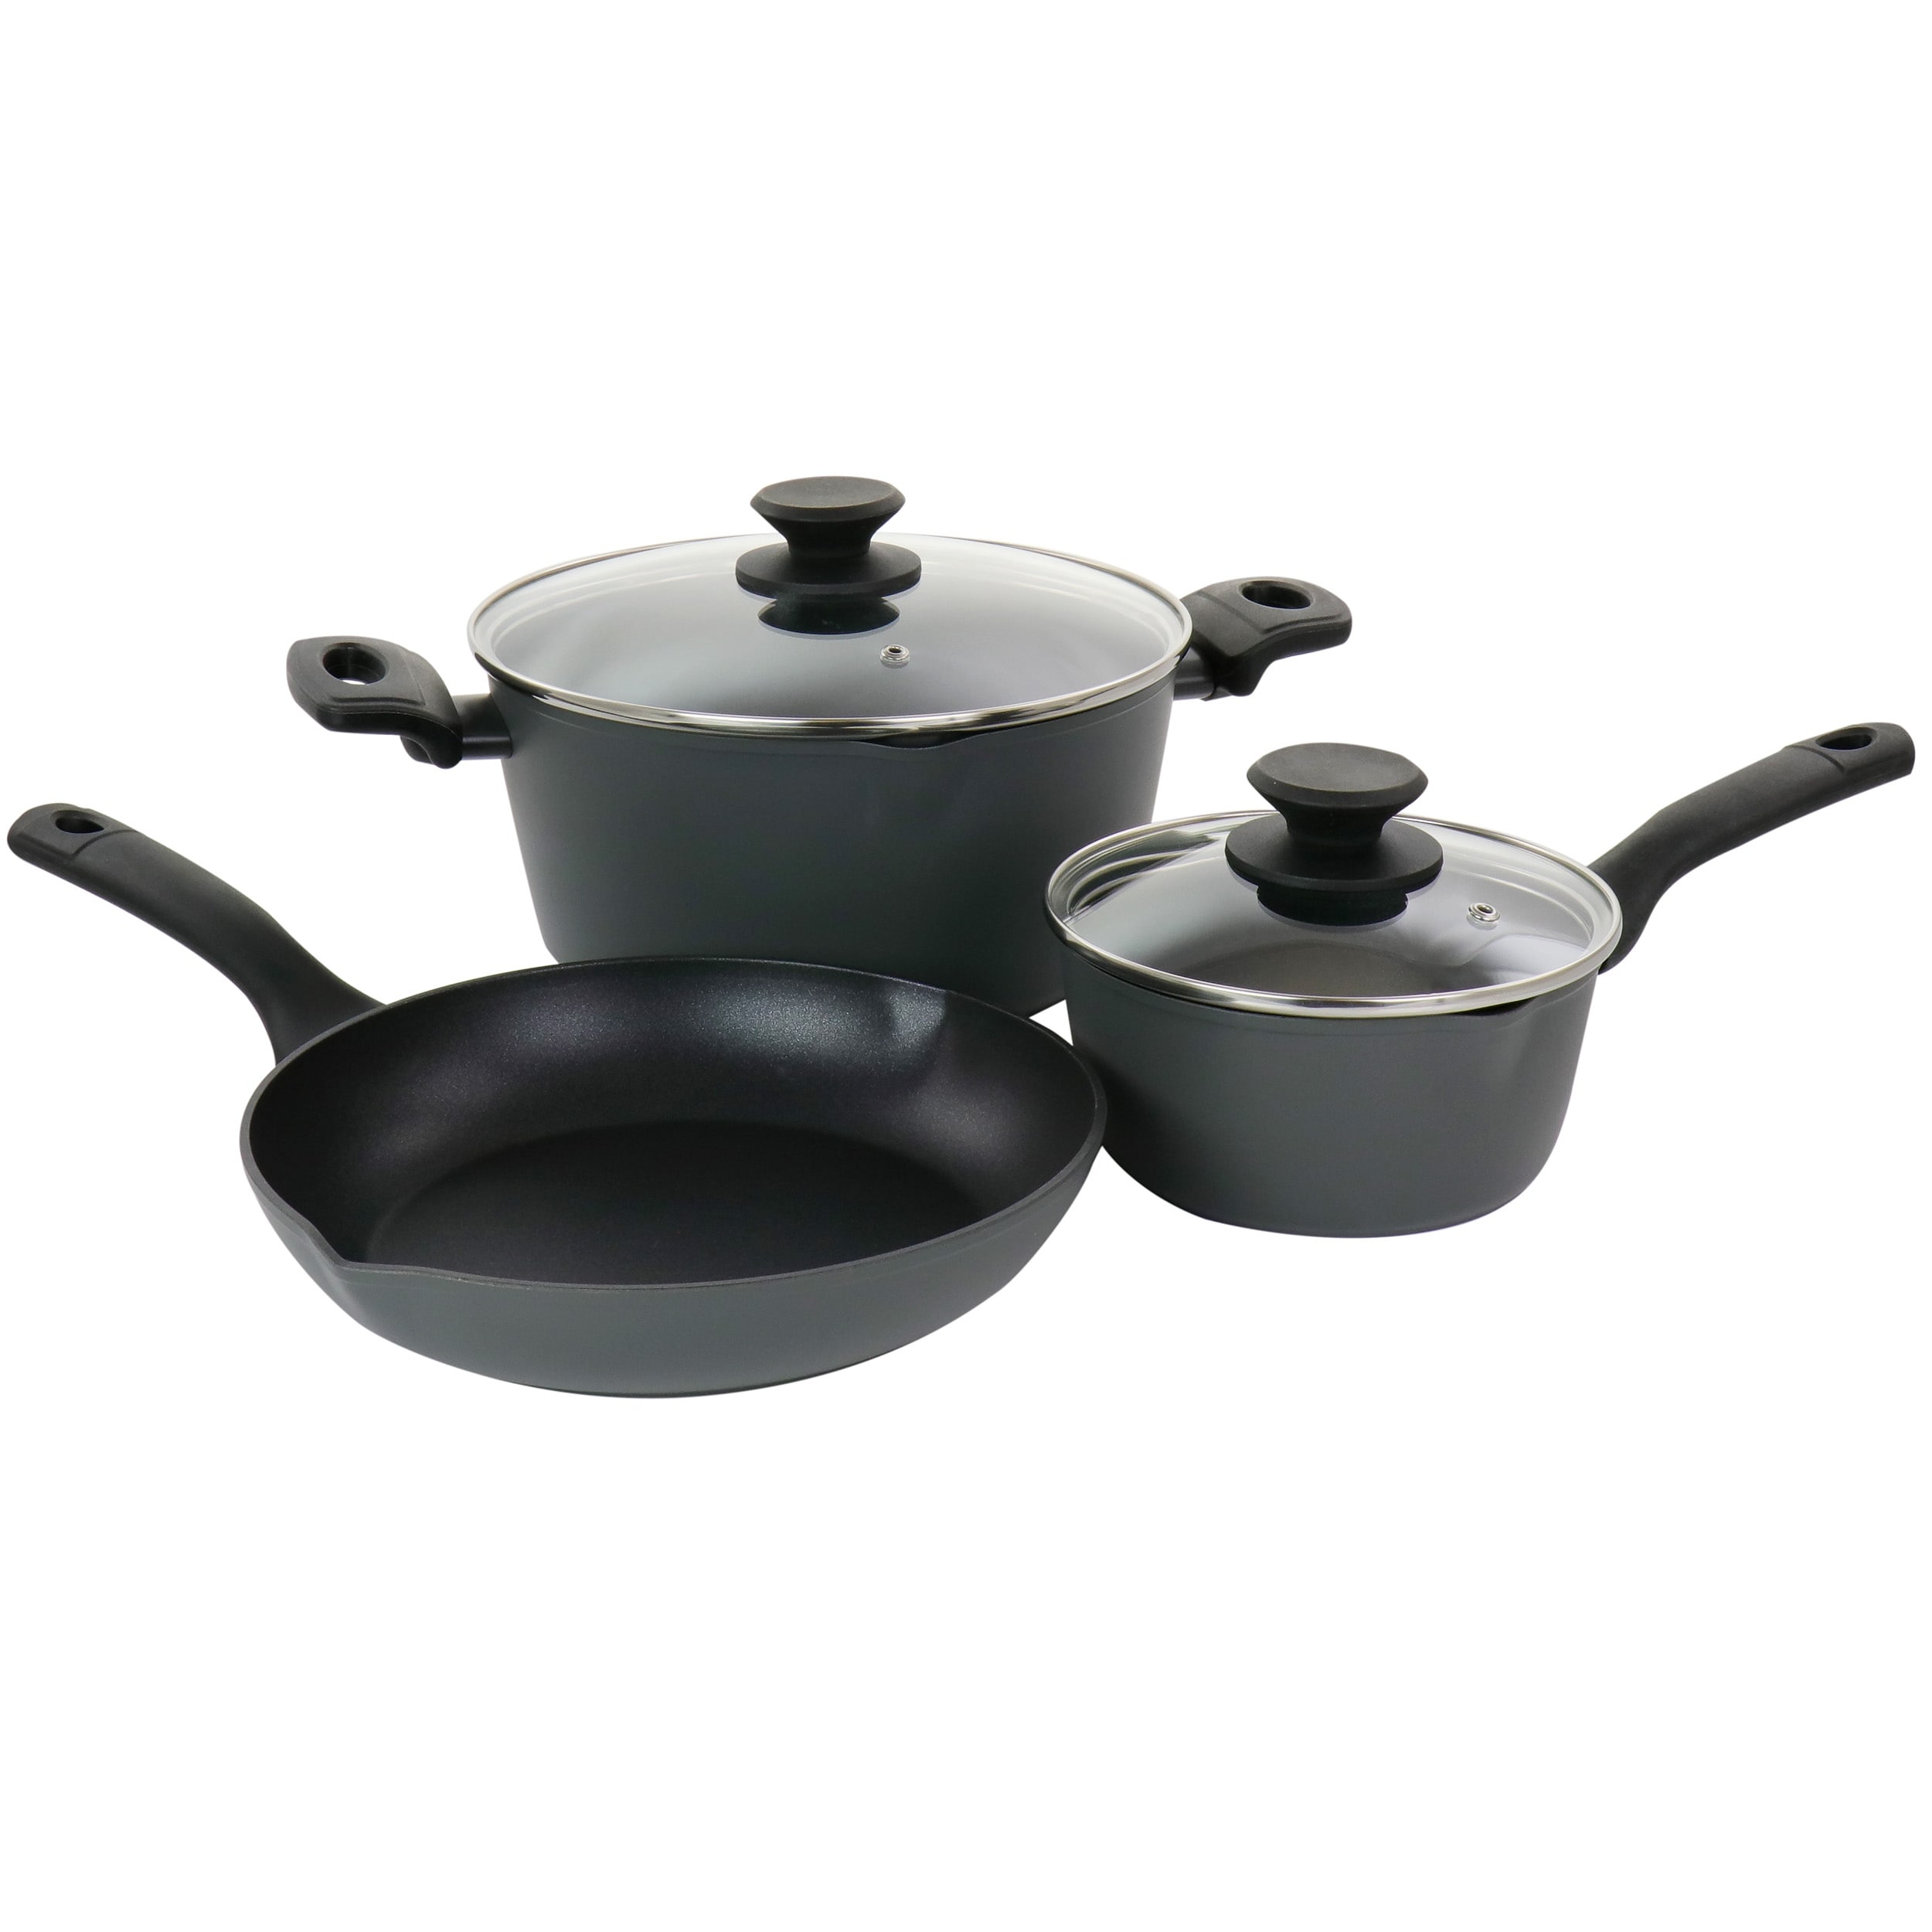 https://ak1.ostkcdn.com/images/products/is/images/direct/4ea4e1273ddbd76566033815e82910134deaf73b/Oster-Kingsway-5-Piece-Aluminum-Nonstick-Cookware-Set-in-Black.jpg